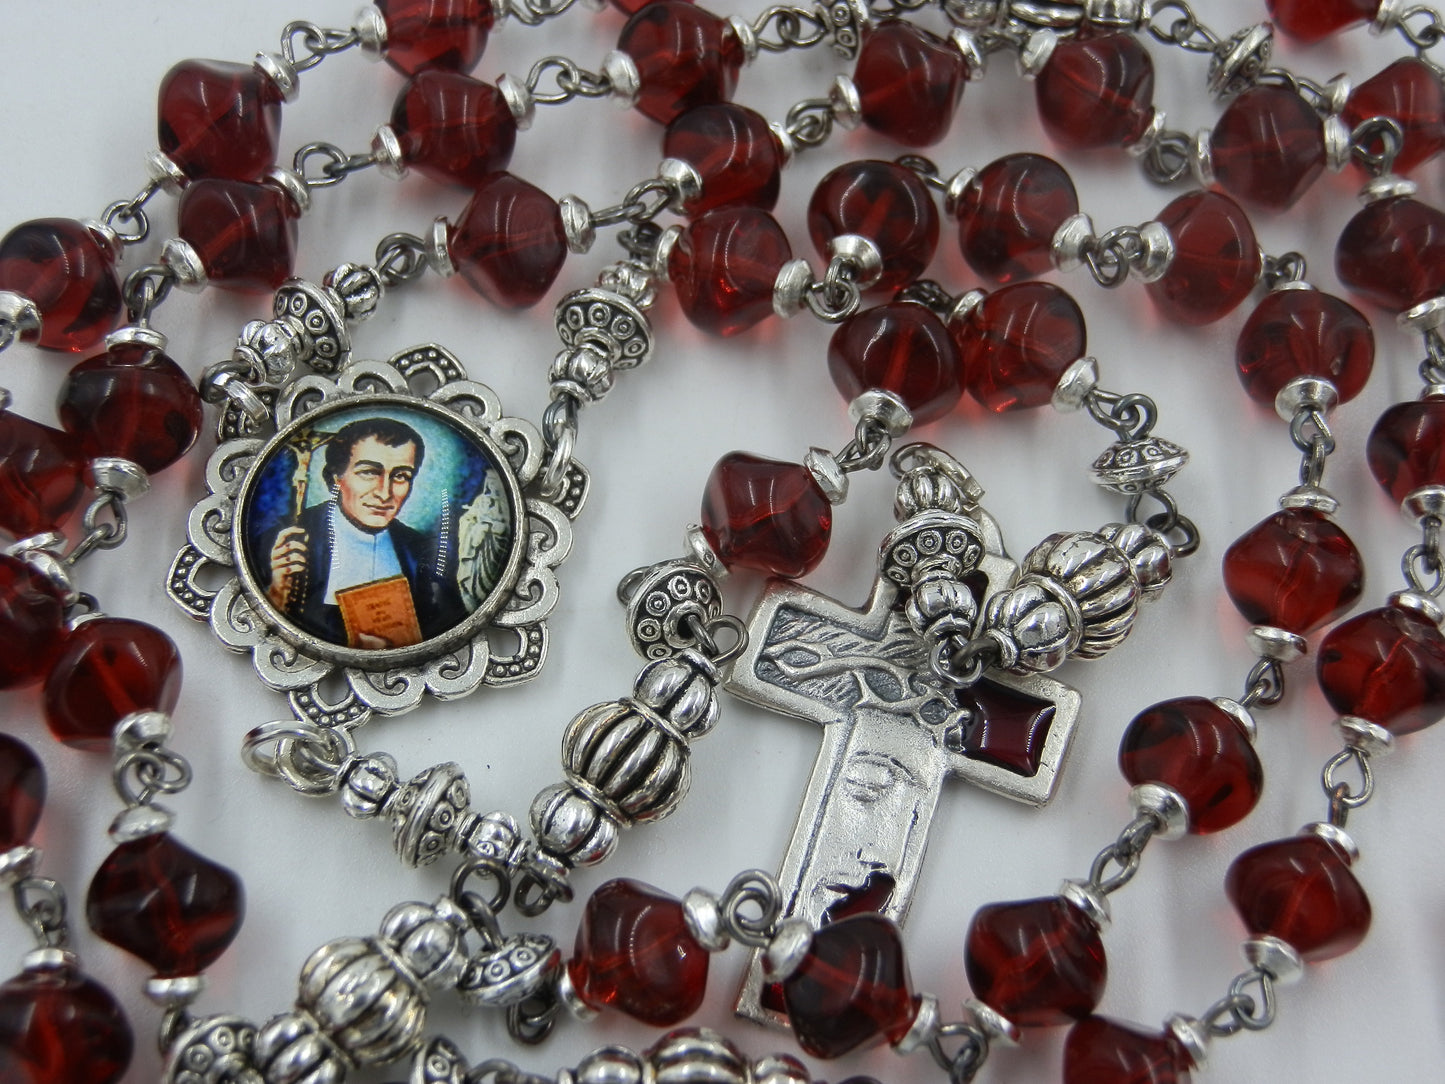 St. Louis de Montford glass rosary beads, Crown of thorns Rosary beads, rosaries, Rosary beads, Spiritual wedding gift, Confirmation Rosary,